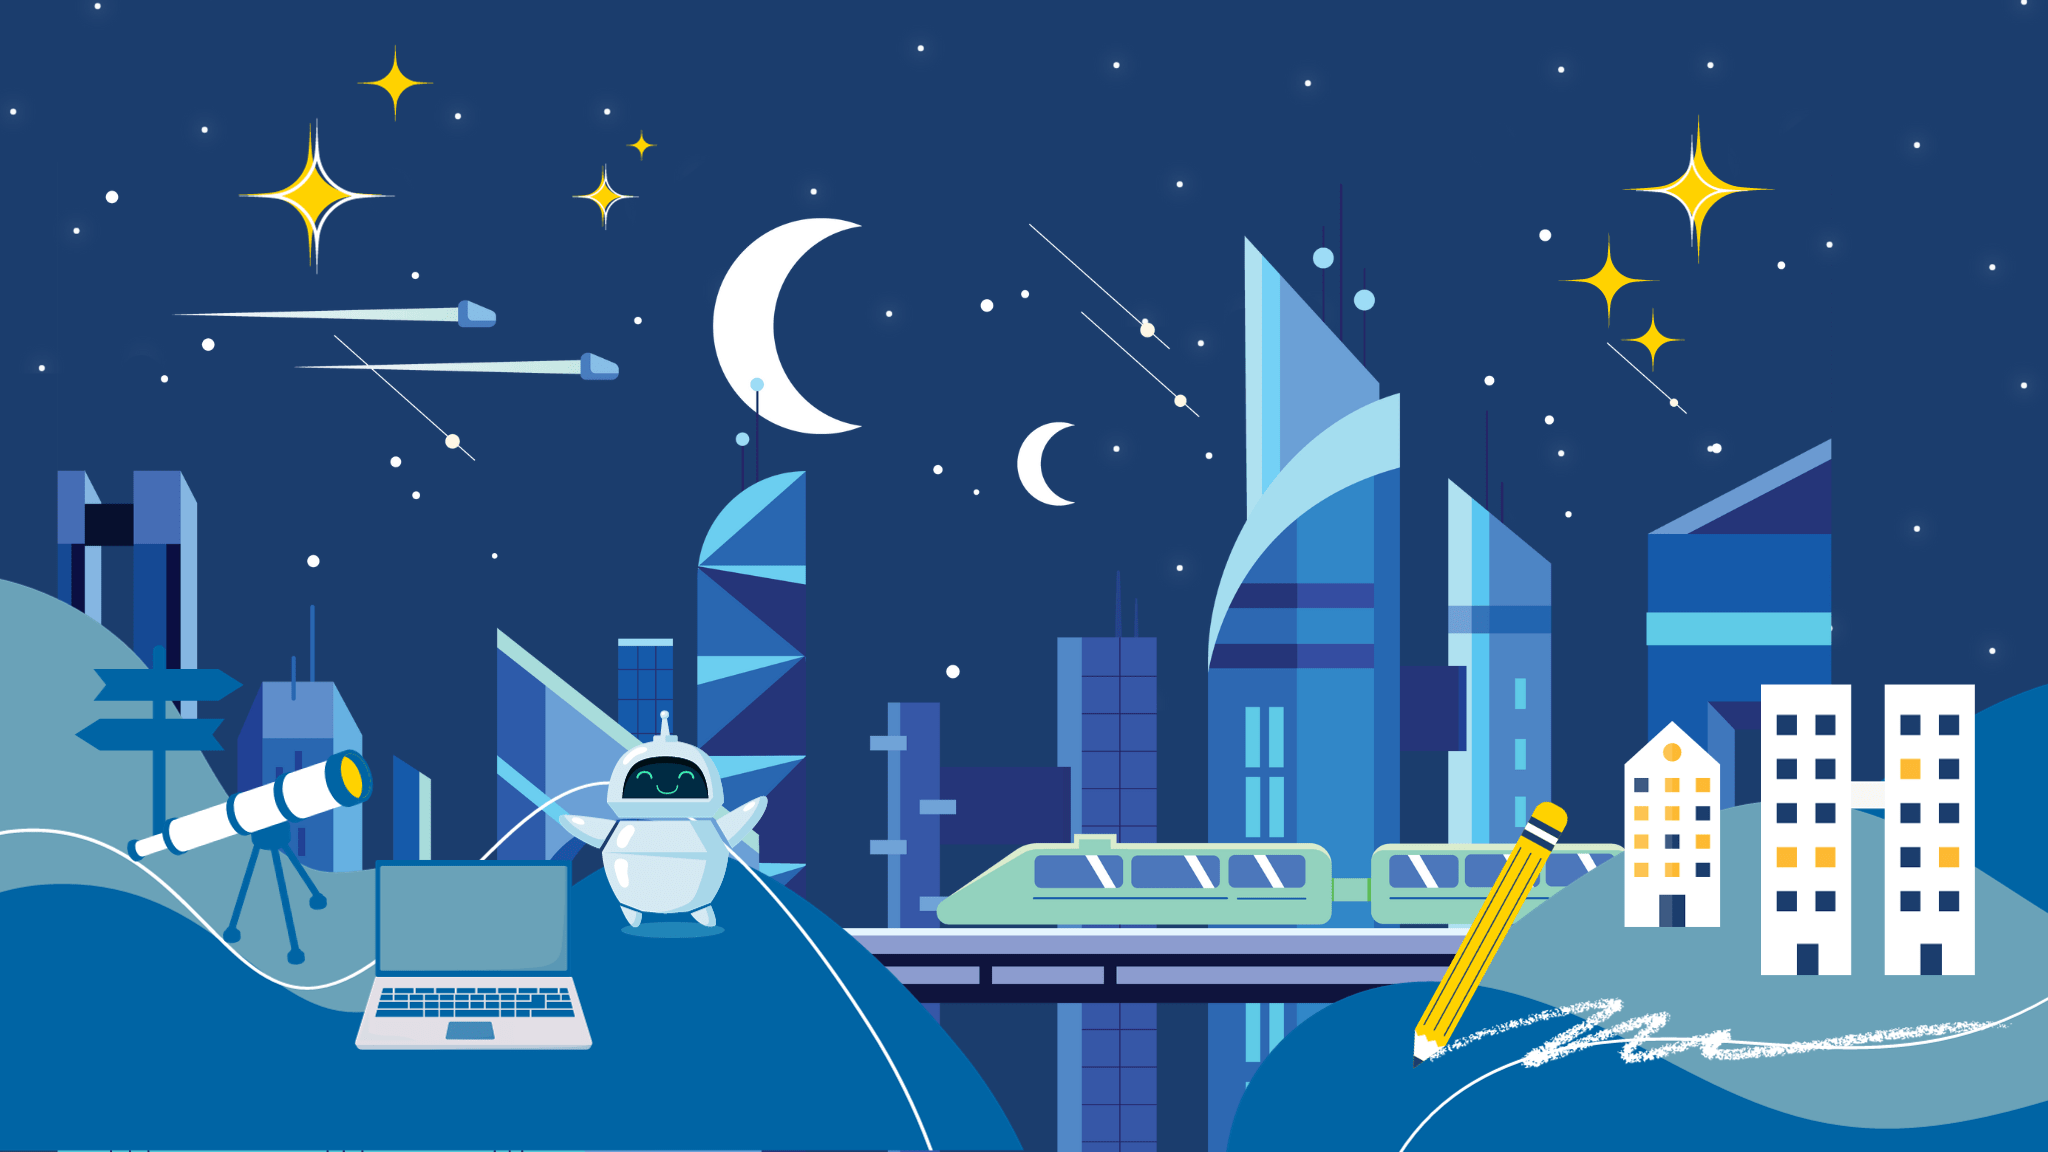 CDS banner dark blue background with city buildings, telescope, and stars